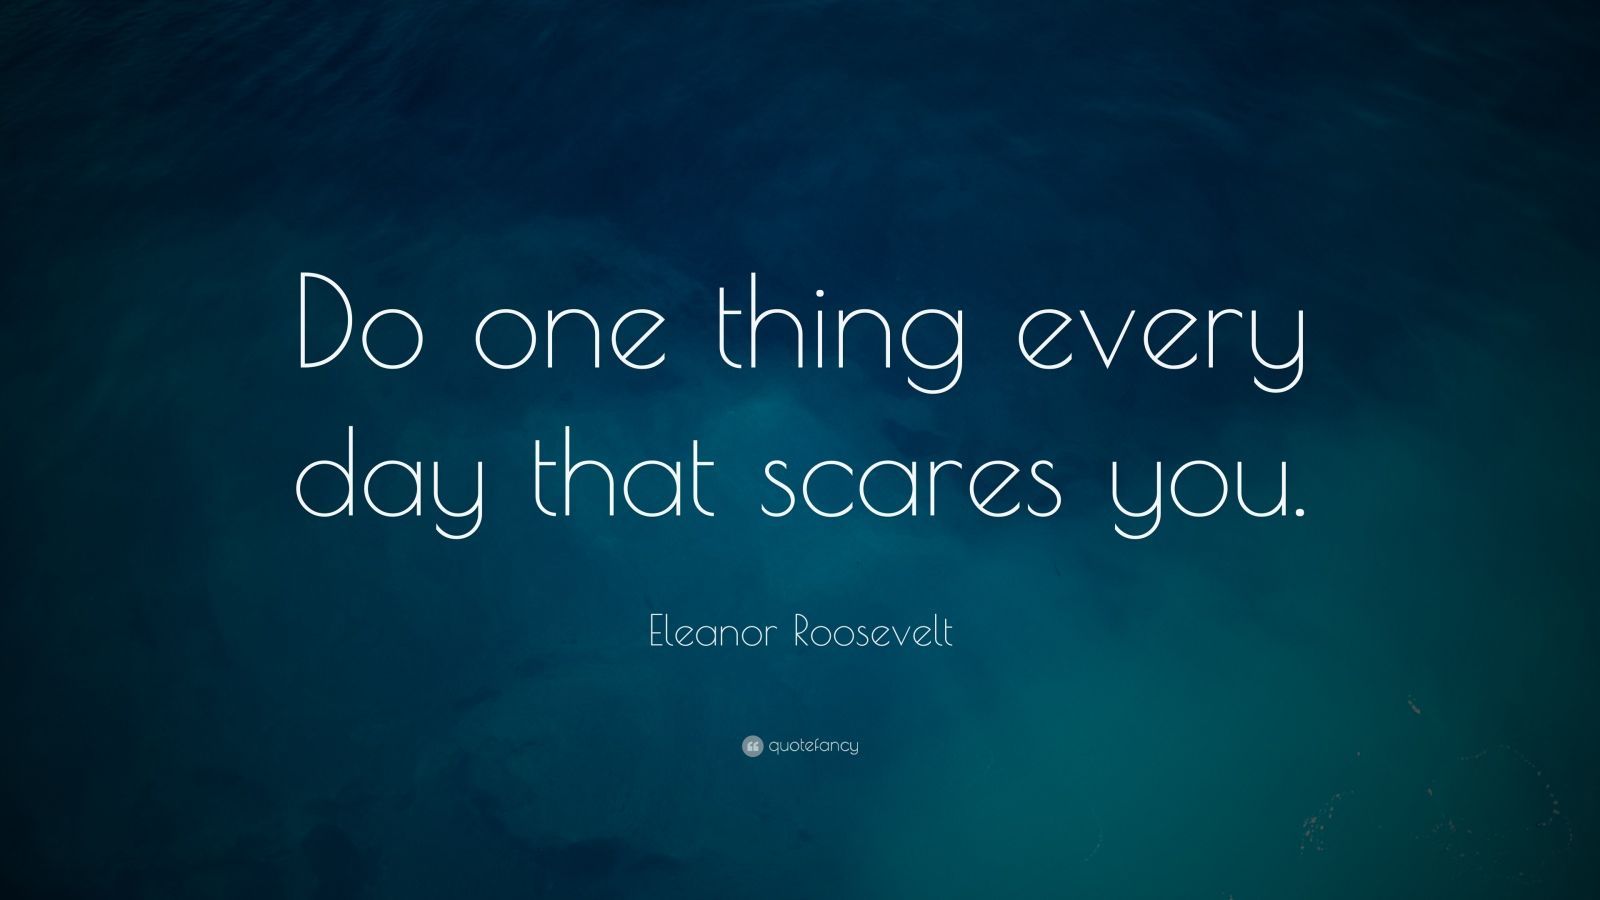 Eleanor Roosevelt Quote: “Do one thing every day that scares you.”